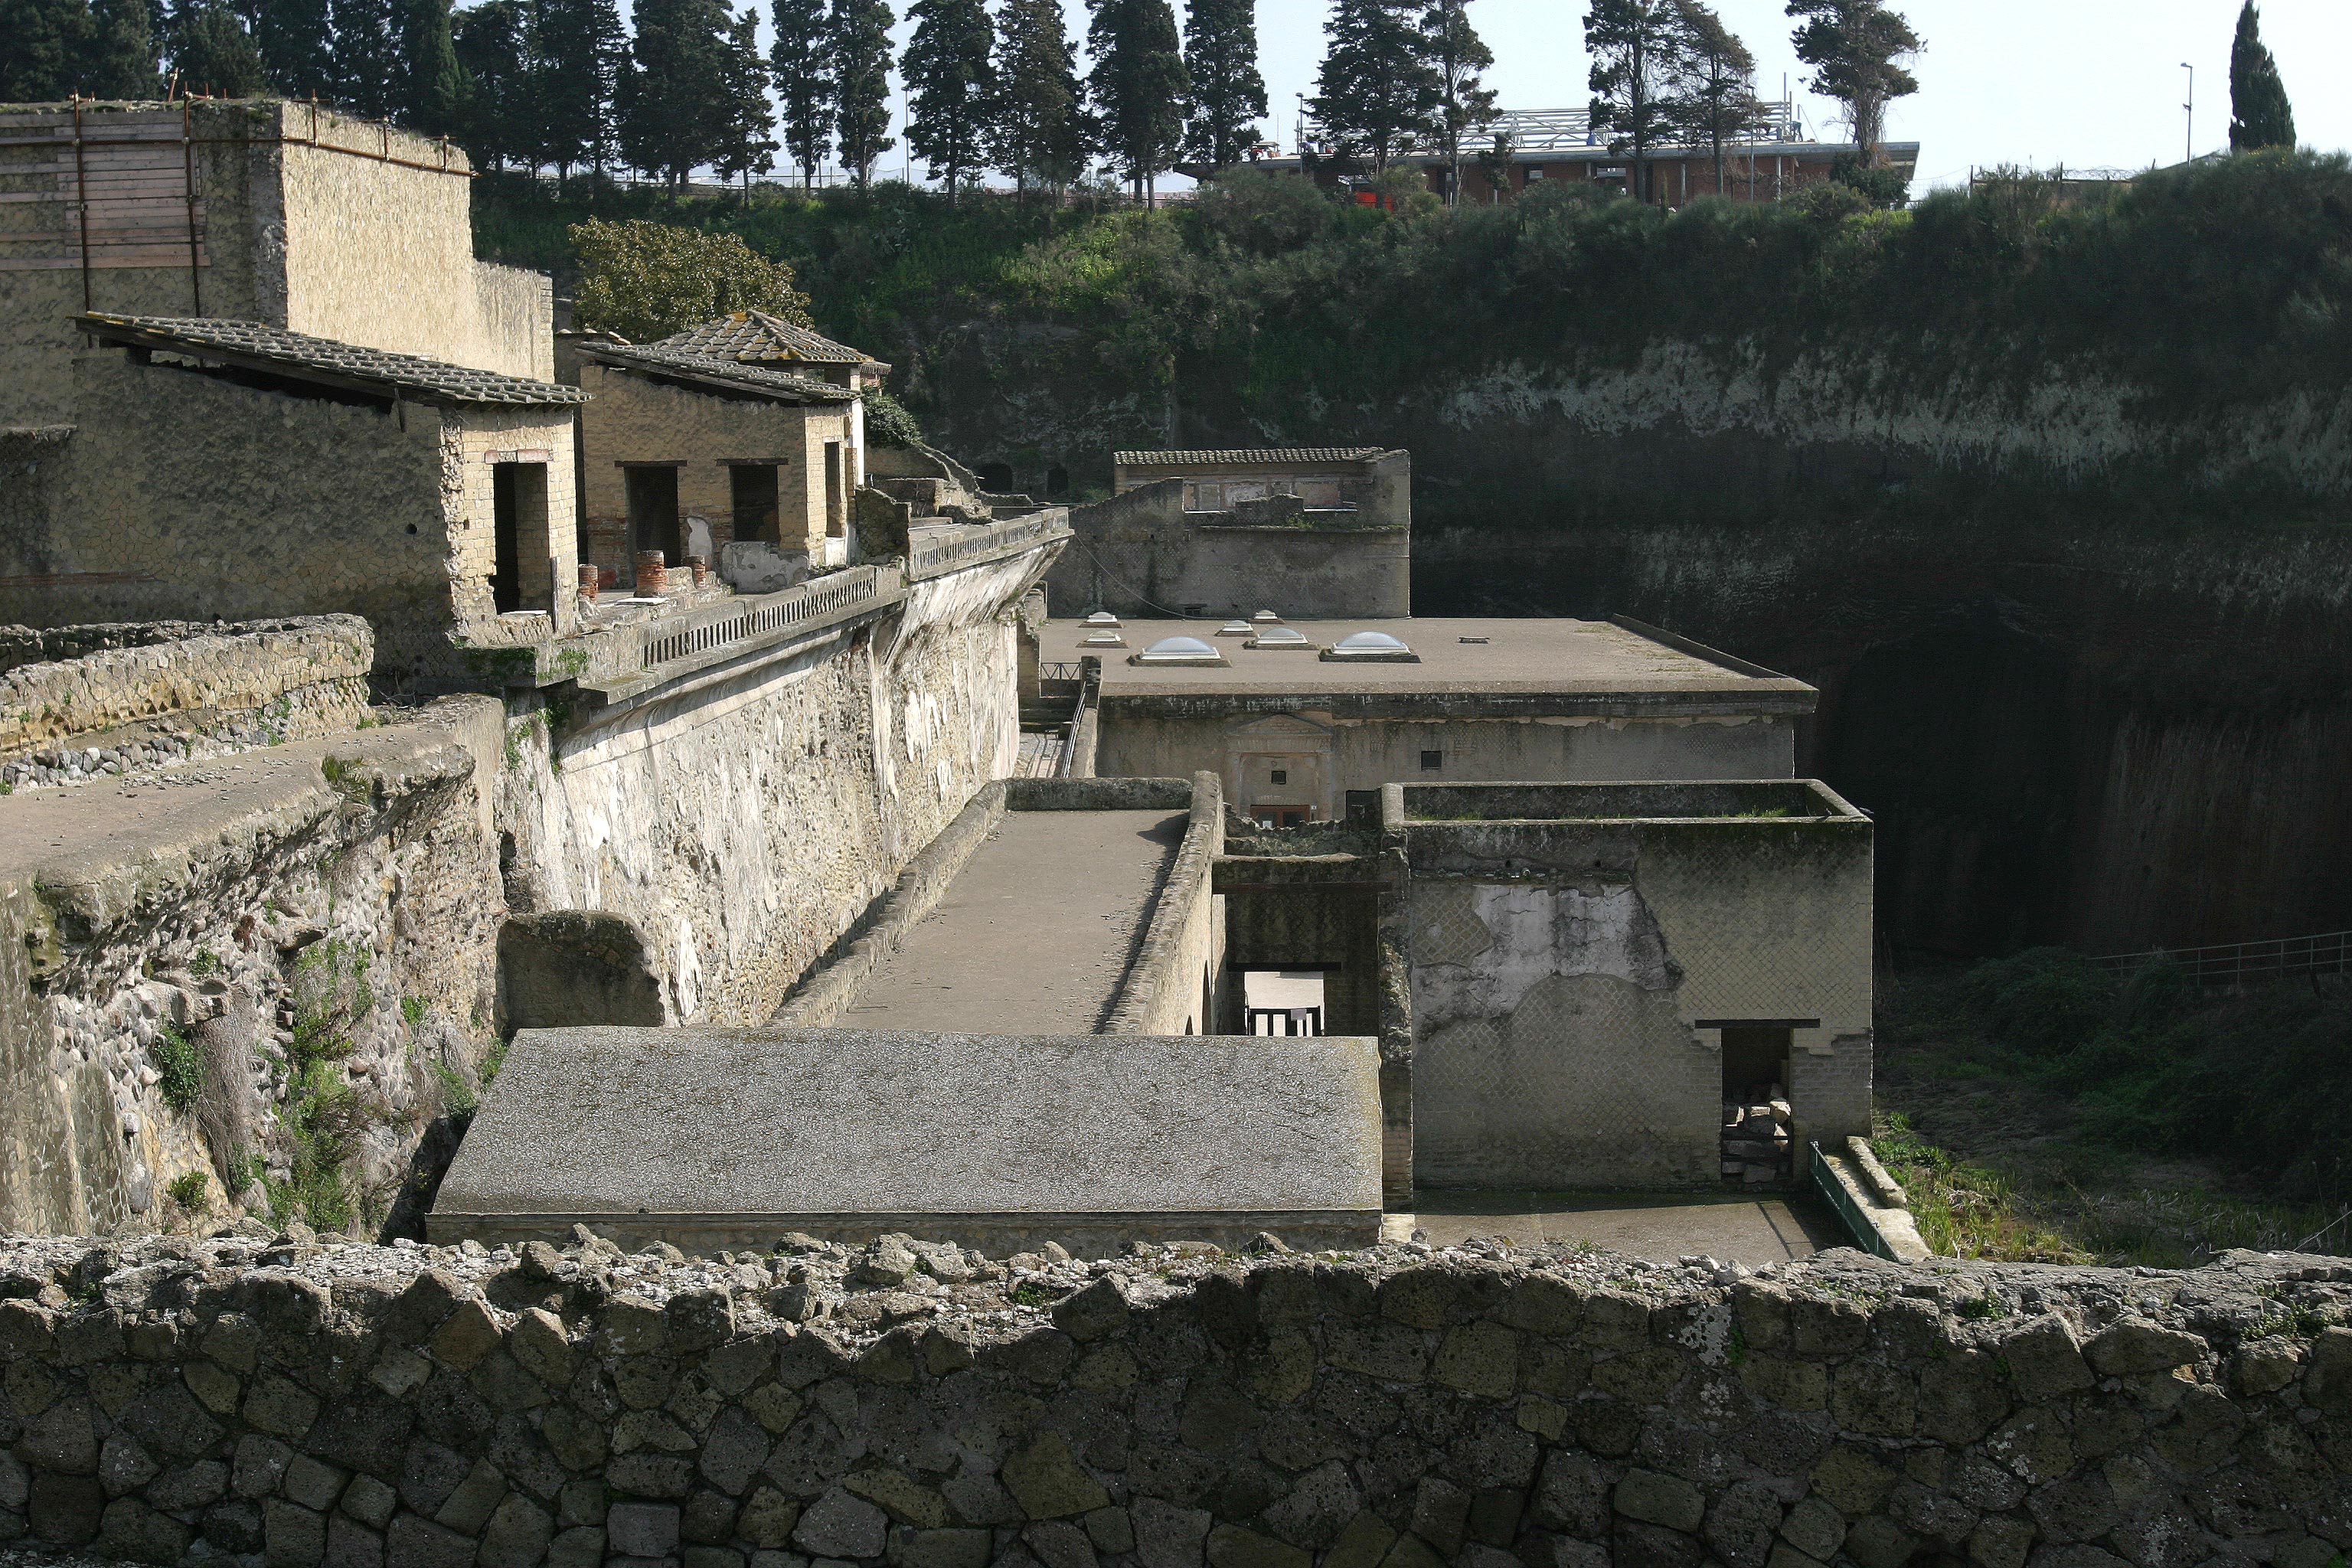 This house was on the beach 2000 years ago. I believe the new Herculaneum is 60 higher than the original.